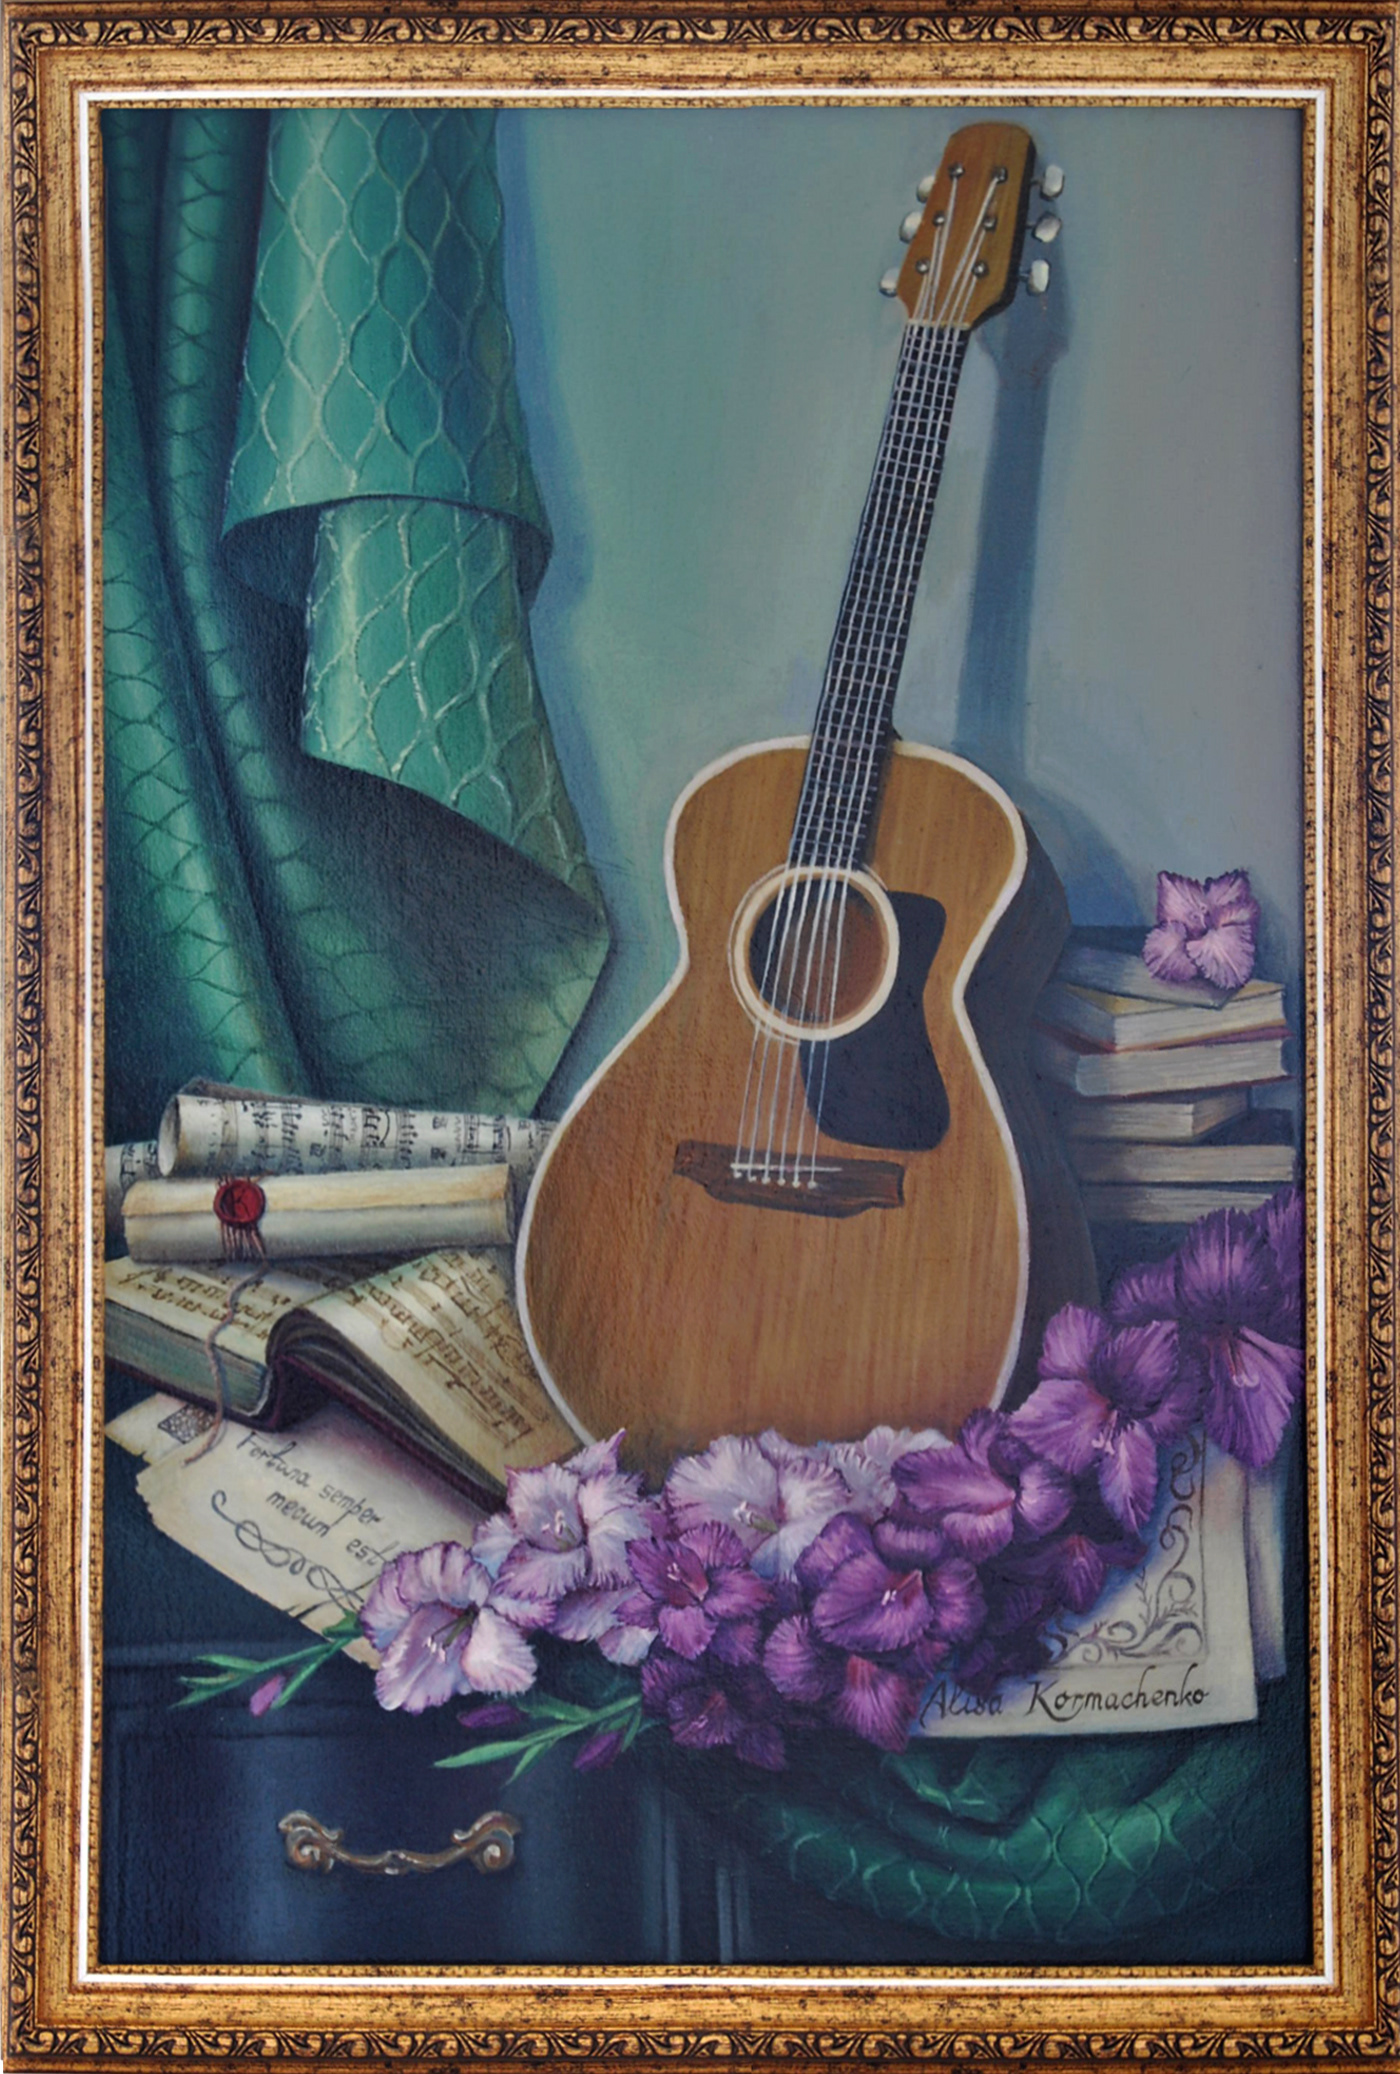 Flowers medical mask design Music Instruments Oil Painting on canvas souvenir products still life typography  